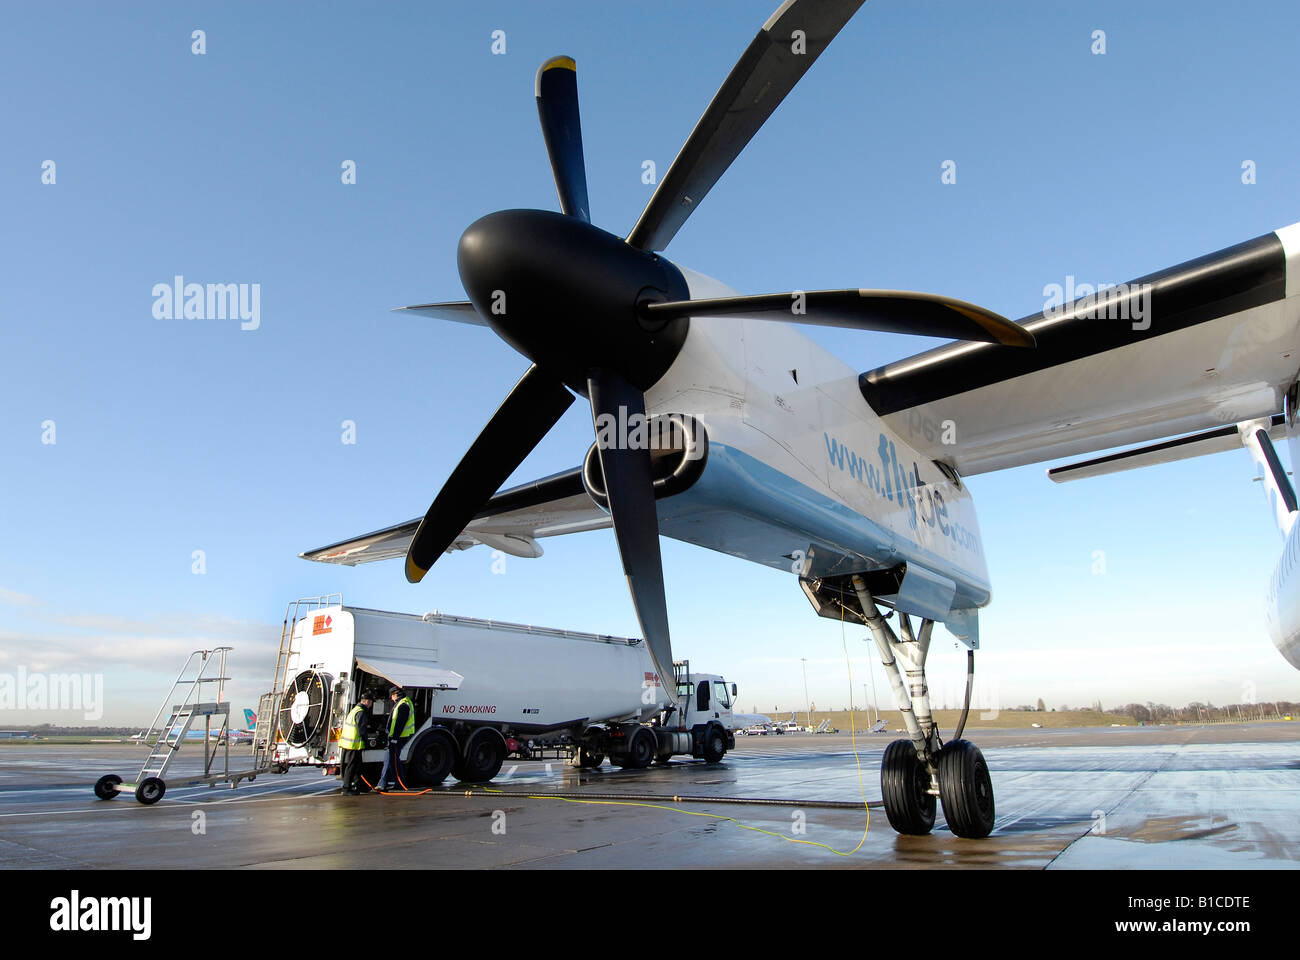 Aircraft refuelling with tanker at airport Stock Photo